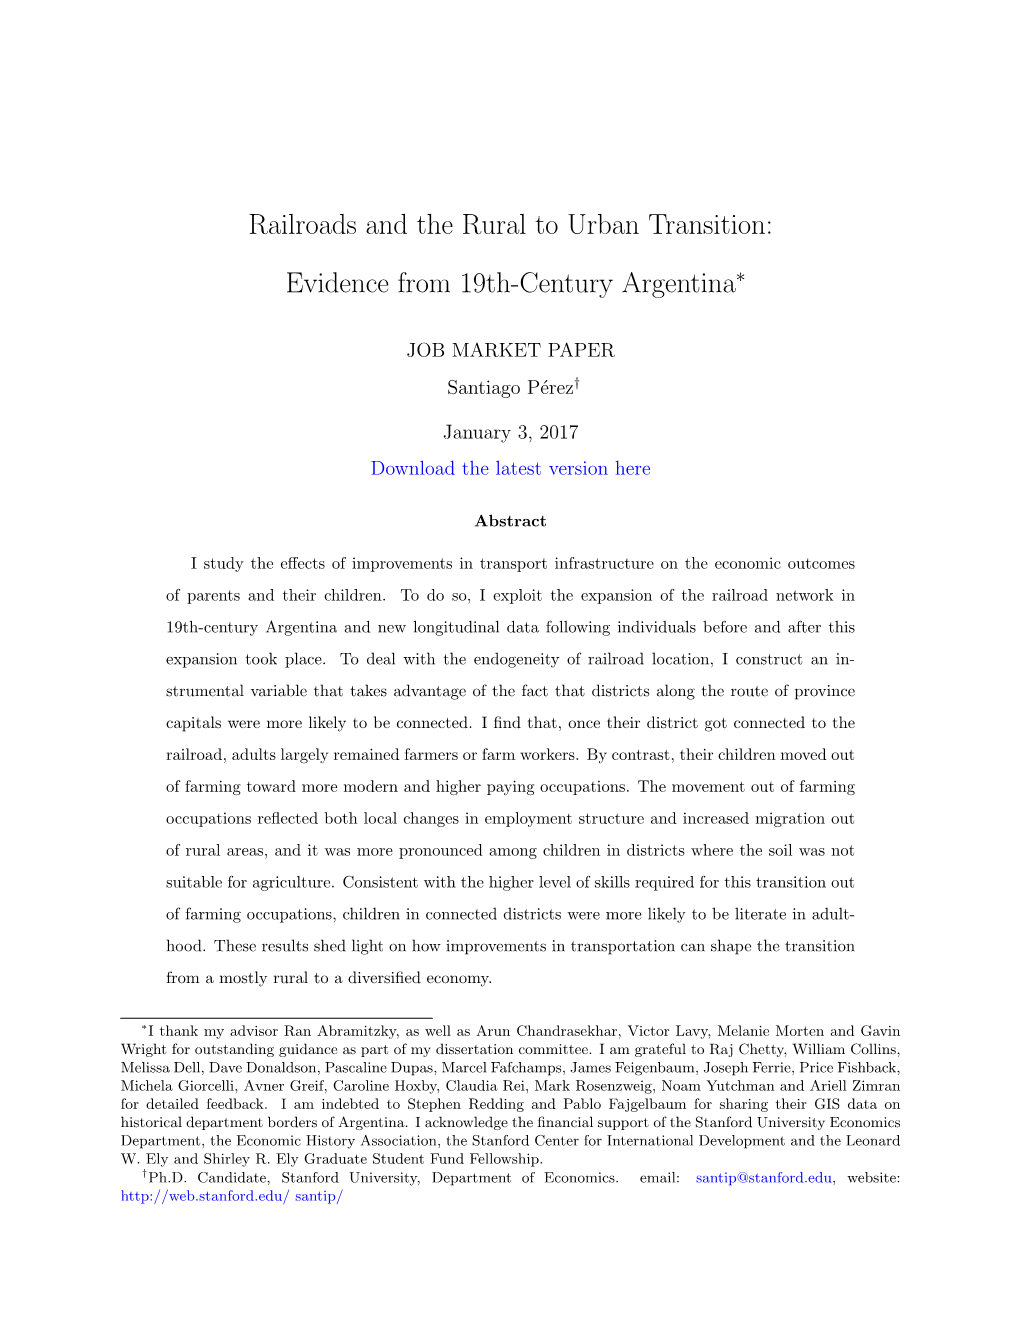 Railroads and the Rural to Urban Transition: Evidence from 19Th